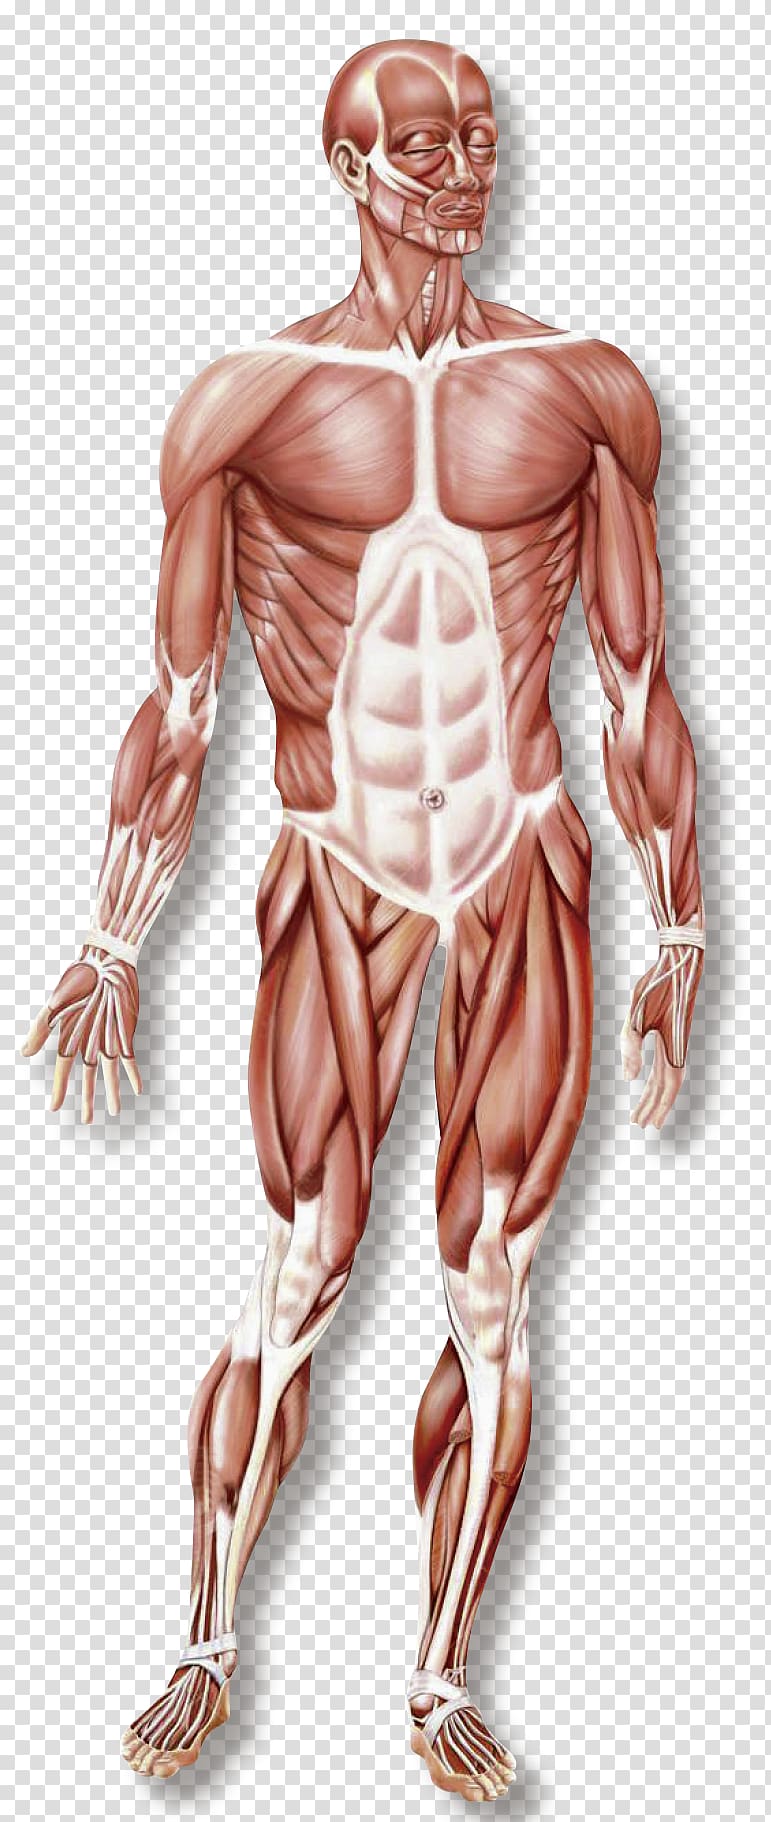 Hand Muscular system Skeletal muscle Organ system Human body, musculo transparent background PNG clipart